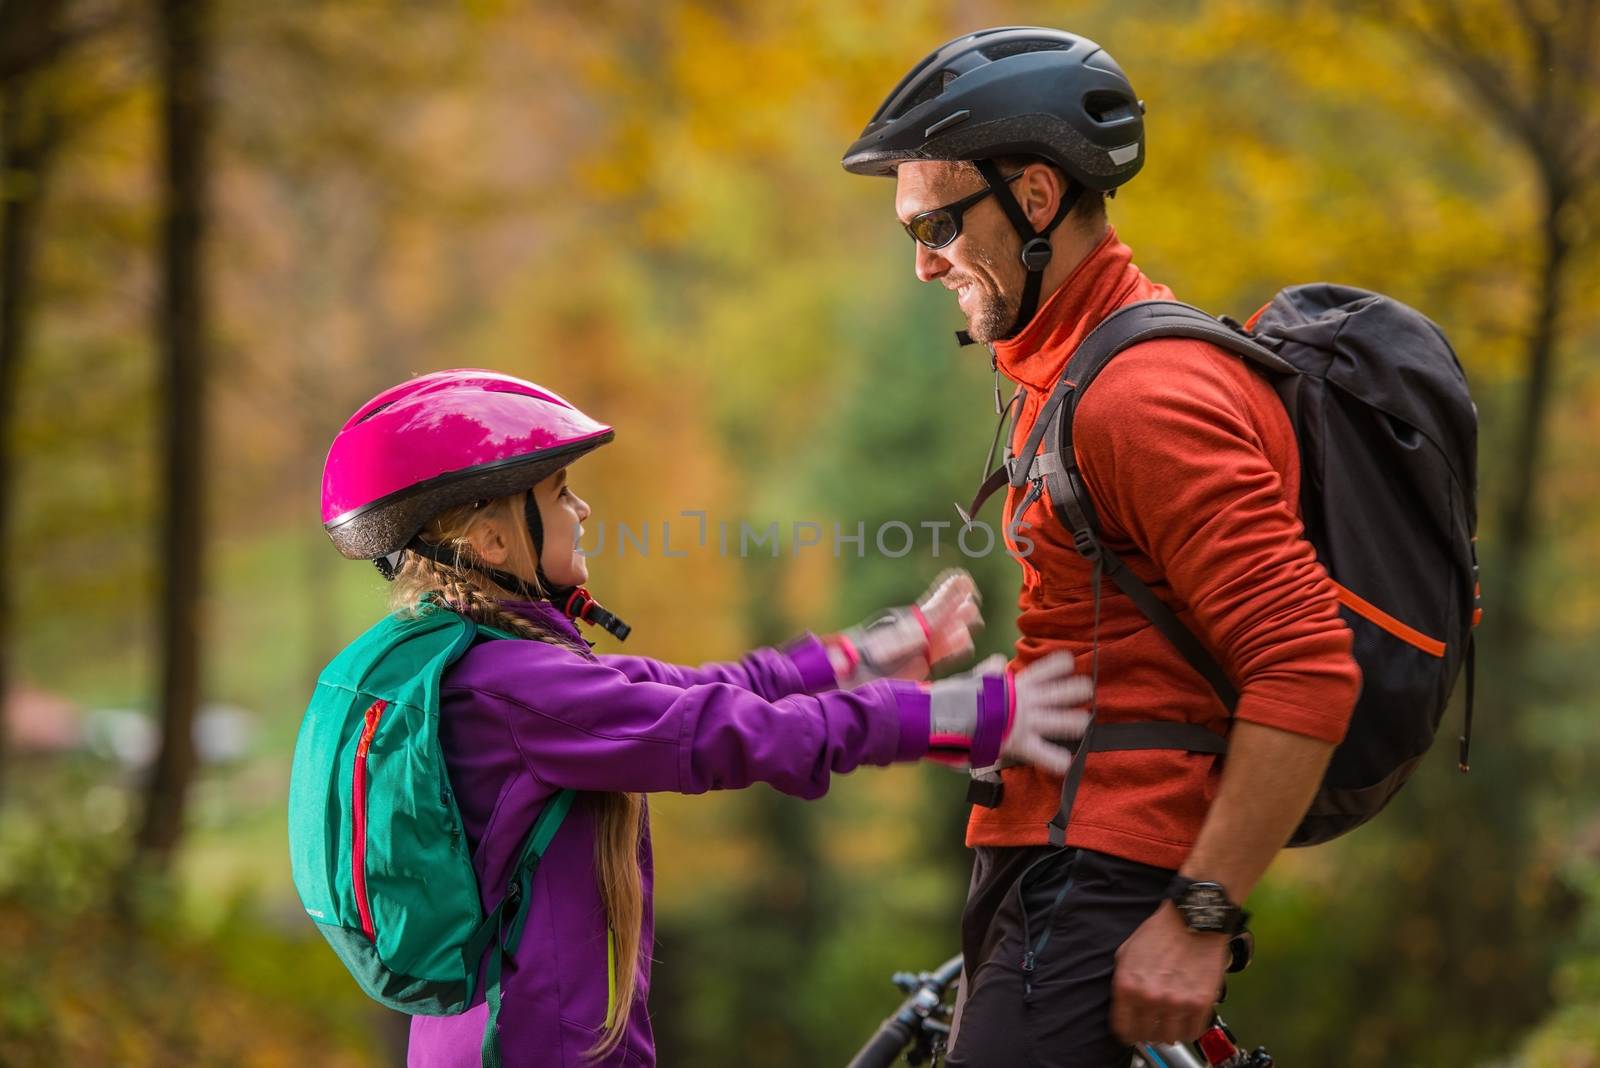 Father Daughter Bikes Trip. Caucasian Men and His Daughter Both Wearing Bike Safety Helmets. Daughter About to Give Father Hug. Family Theme.